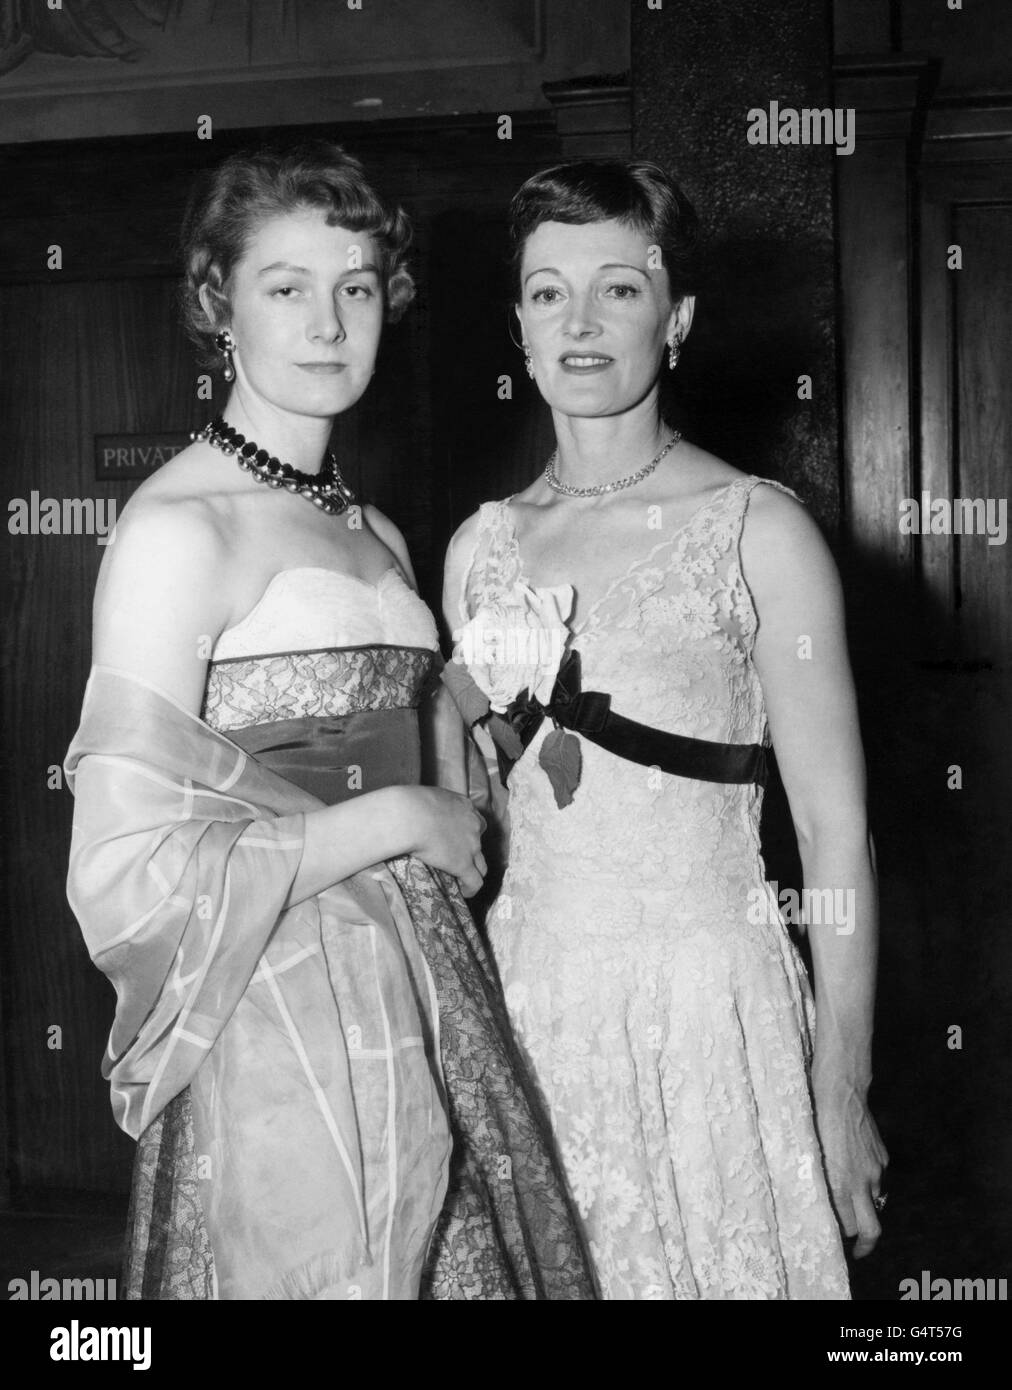 Rachel Kempson, actress wife of actor Michael Redgrave (r), and their daughter Vanessa Redgrave, at the premiere of the film 'The Night My Number Came Up' - in which Michael stars - at the Leicester Square Theatre, London. Stock Photo